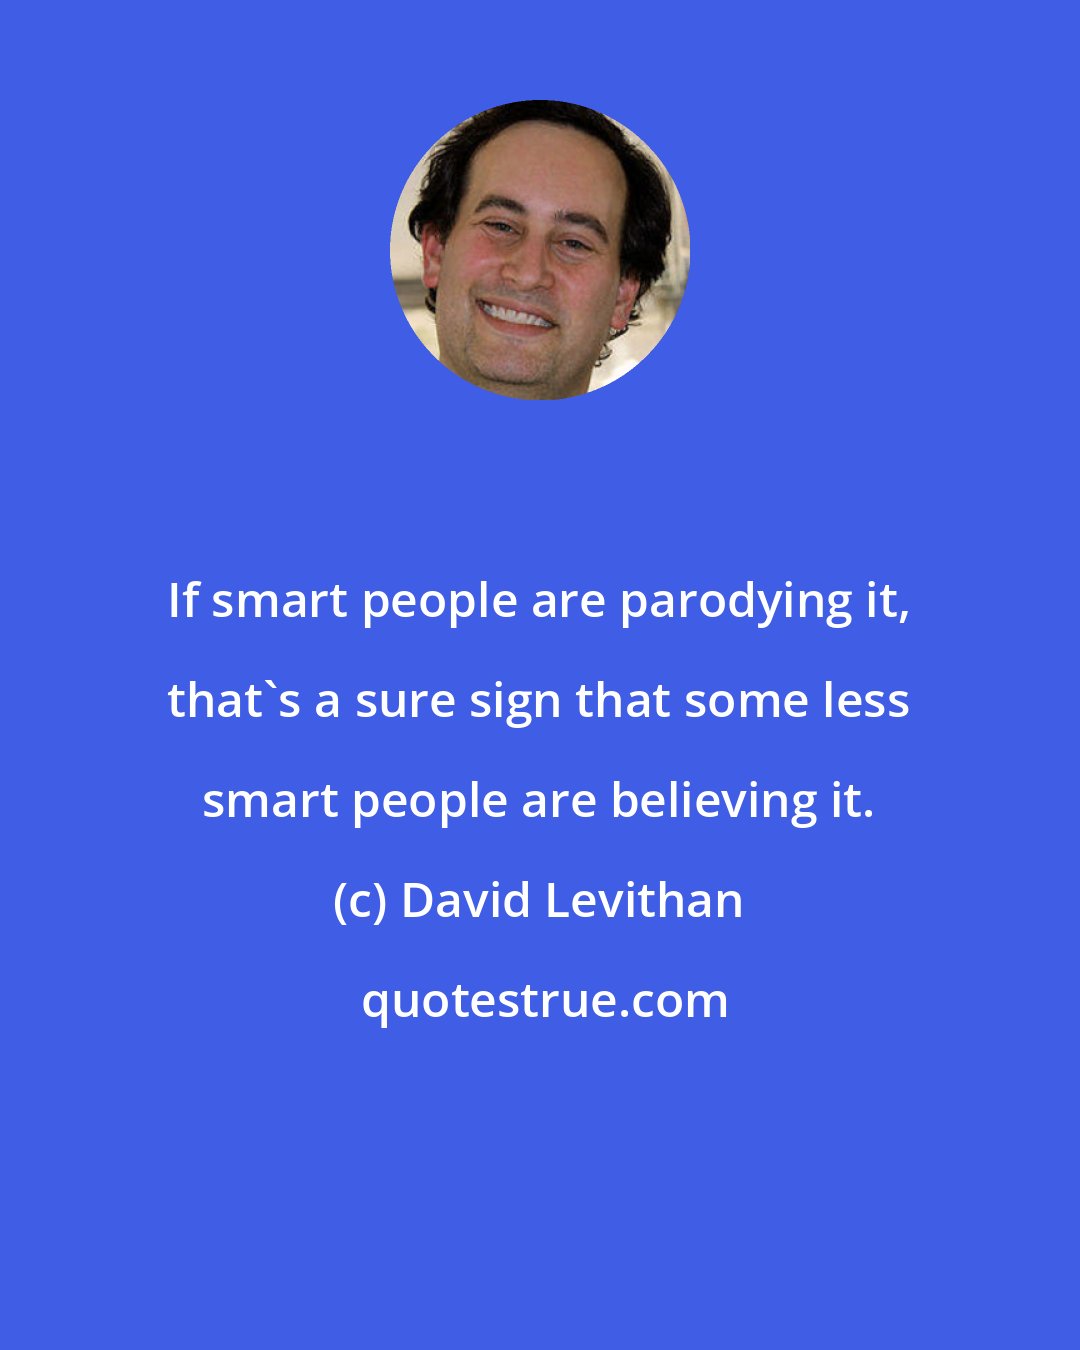 David Levithan: If smart people are parodying it, that's a sure sign that some less smart people are believing it.